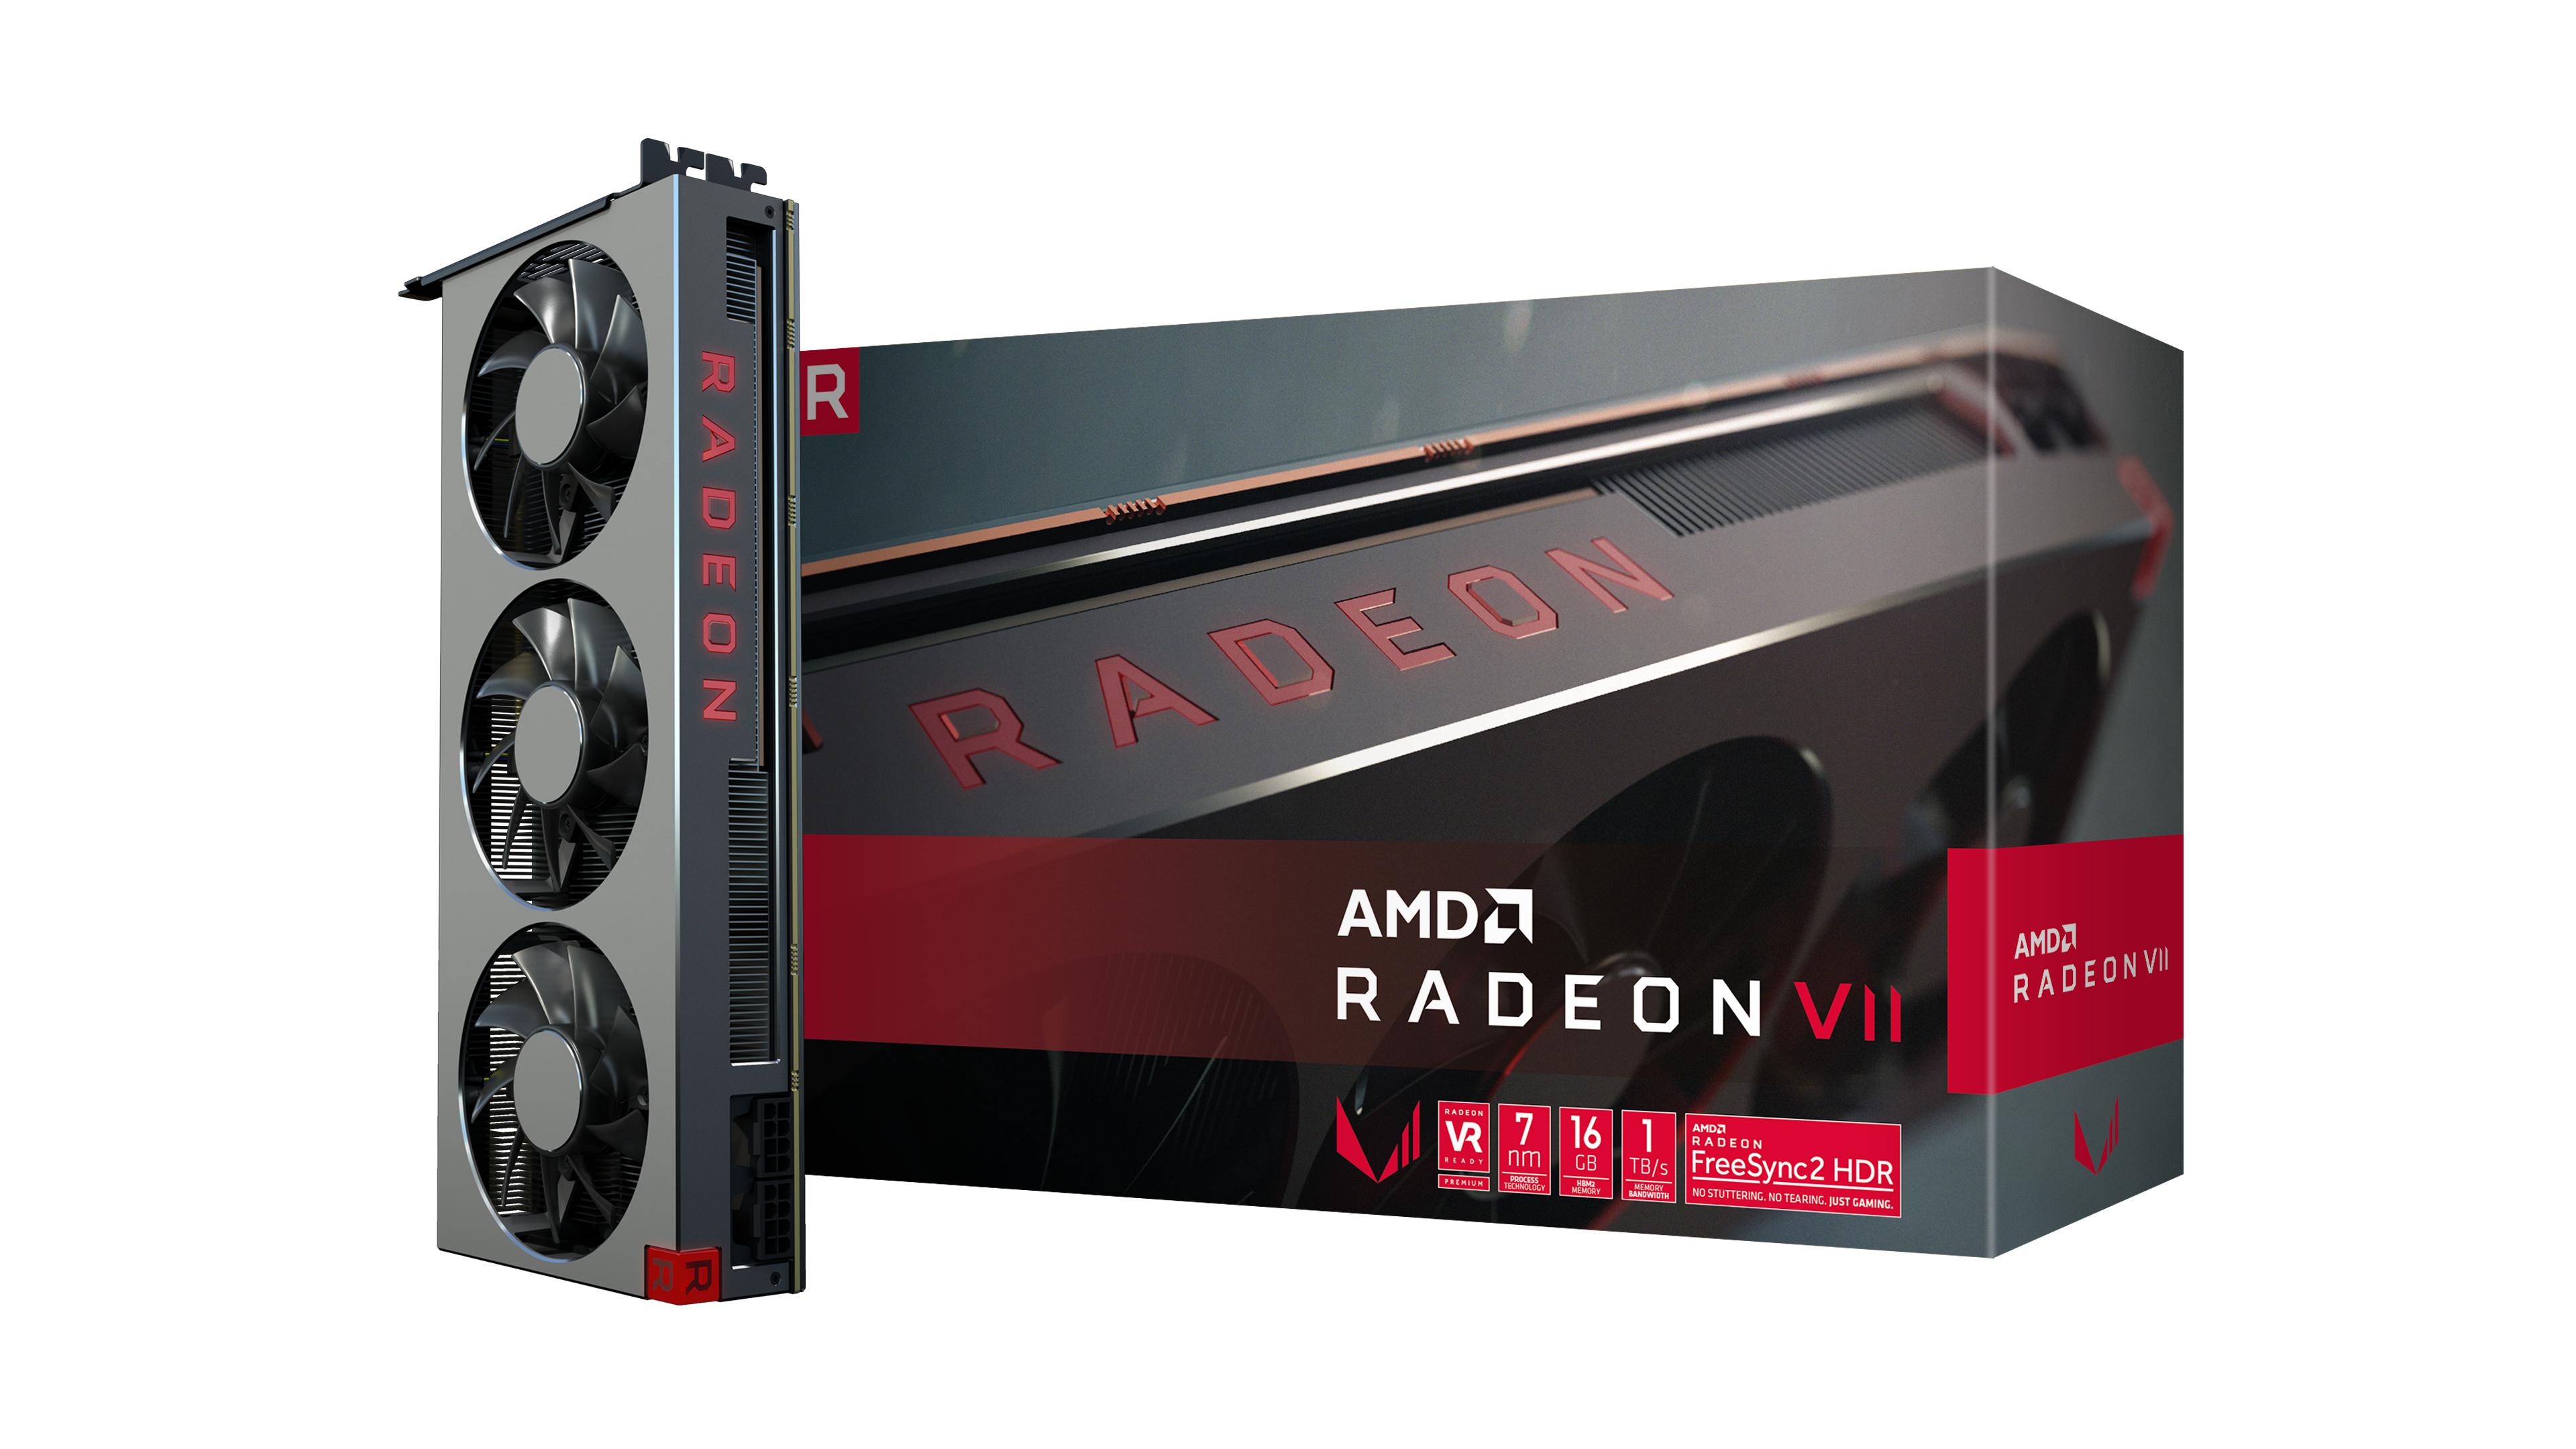 The AMD Radeon VII Review: An Unexpected Shot At The High-End